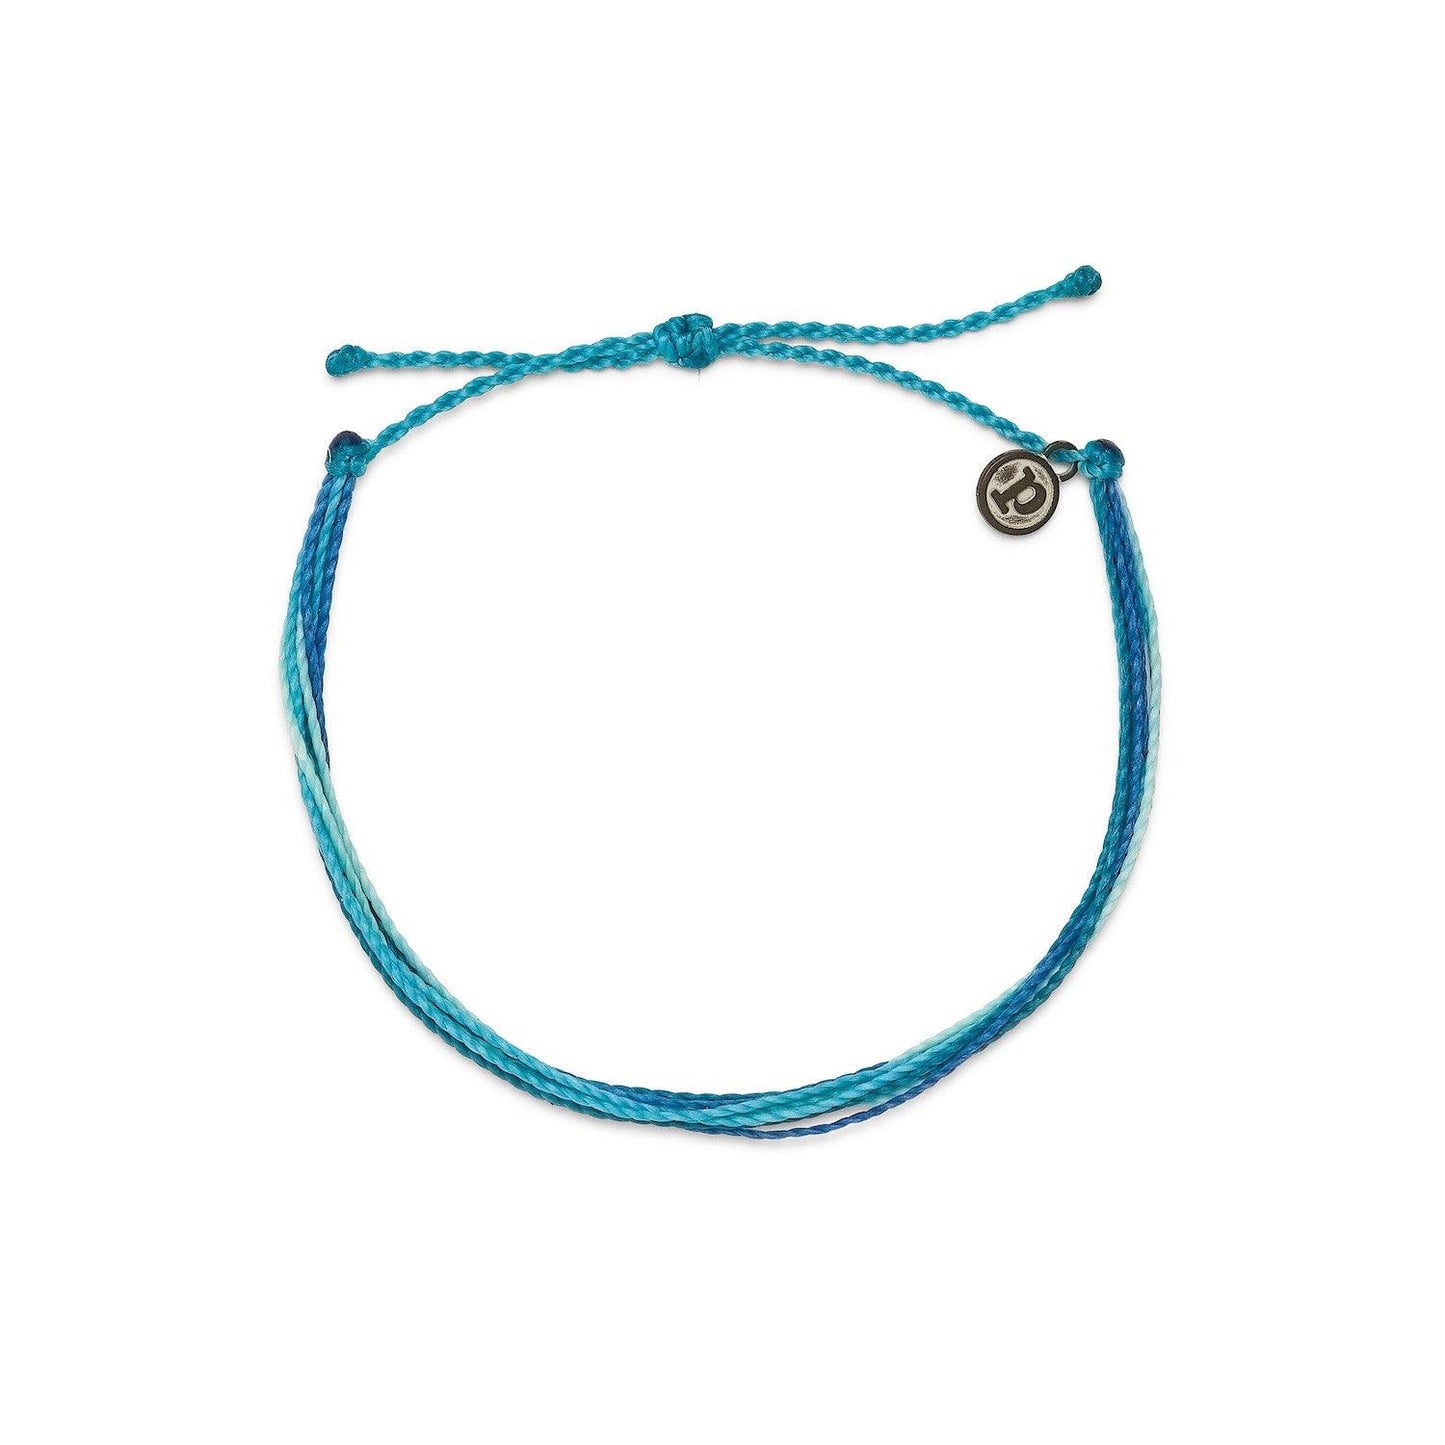 Original Anklet - The Salty Mare